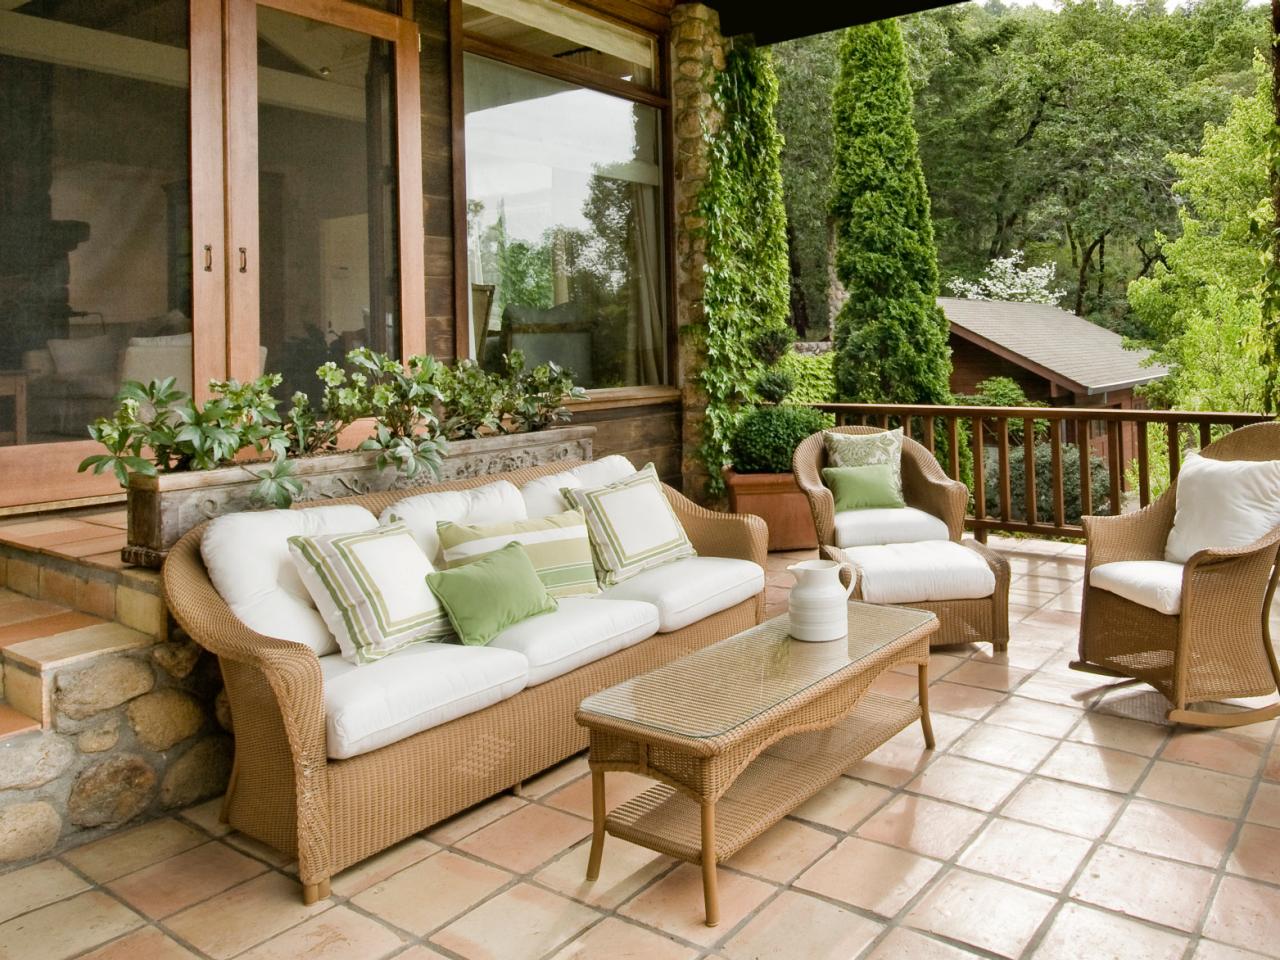 Patio Tiles, What Tile To Use For Outdoor Patio